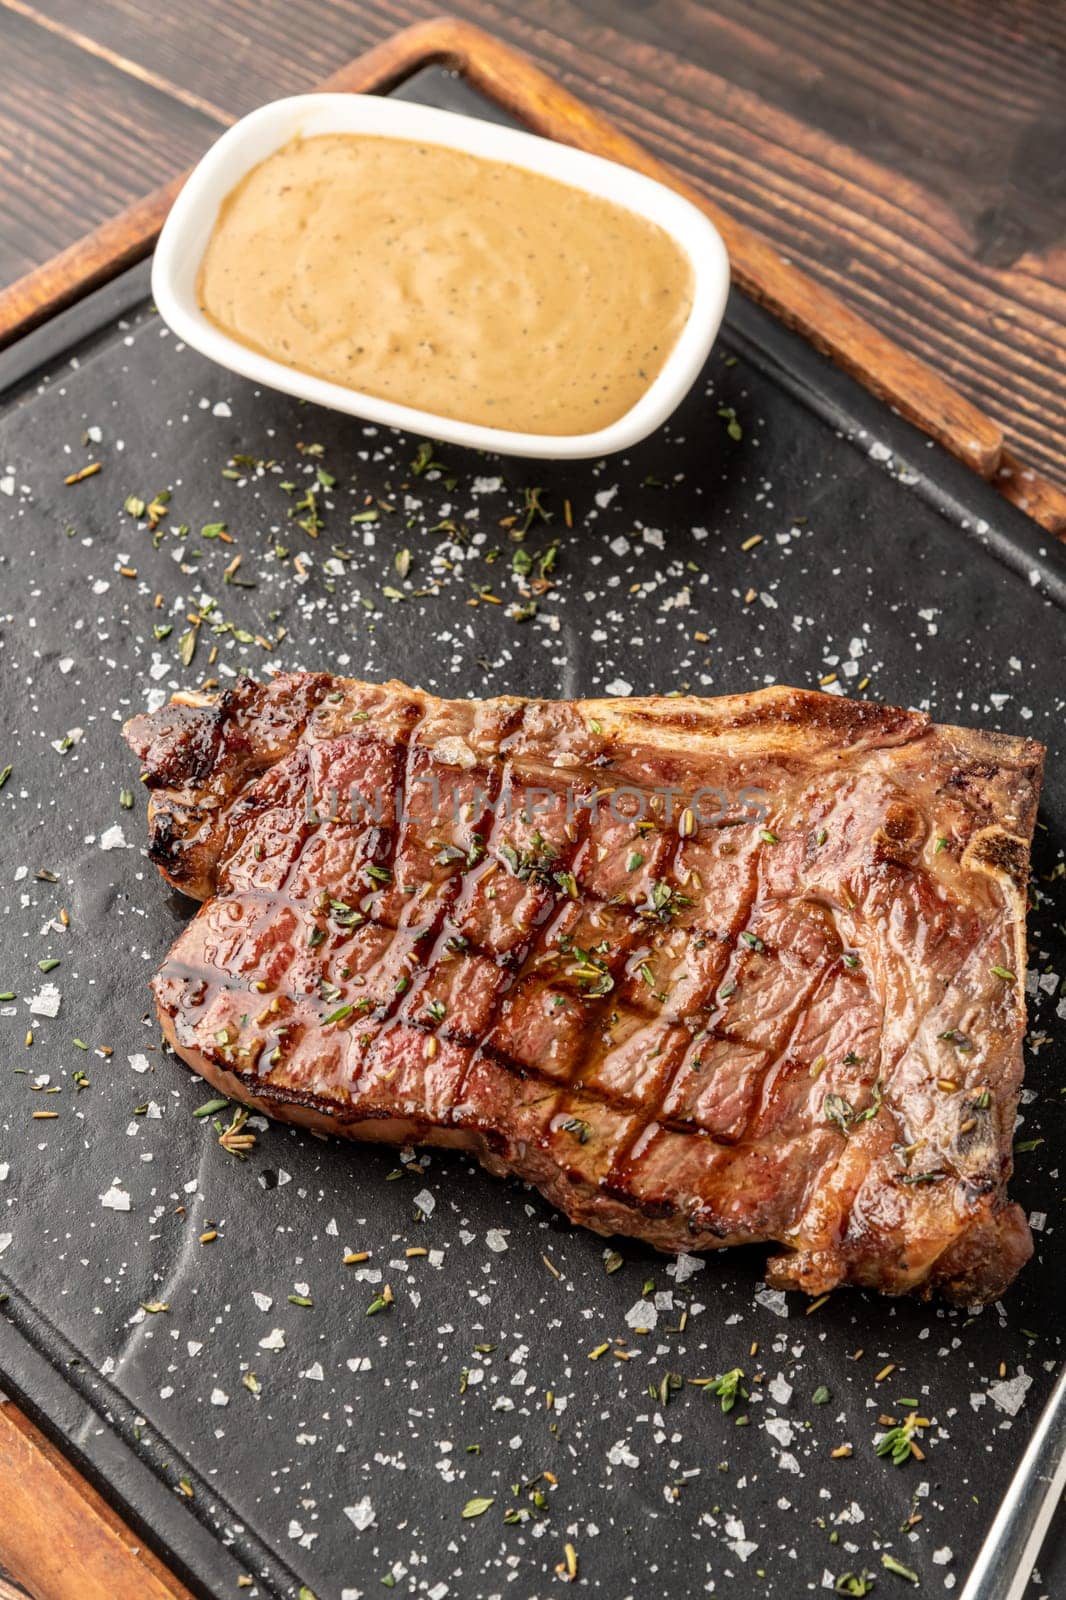 New York Strip Loin on stone cutting board at steak house by Sonat